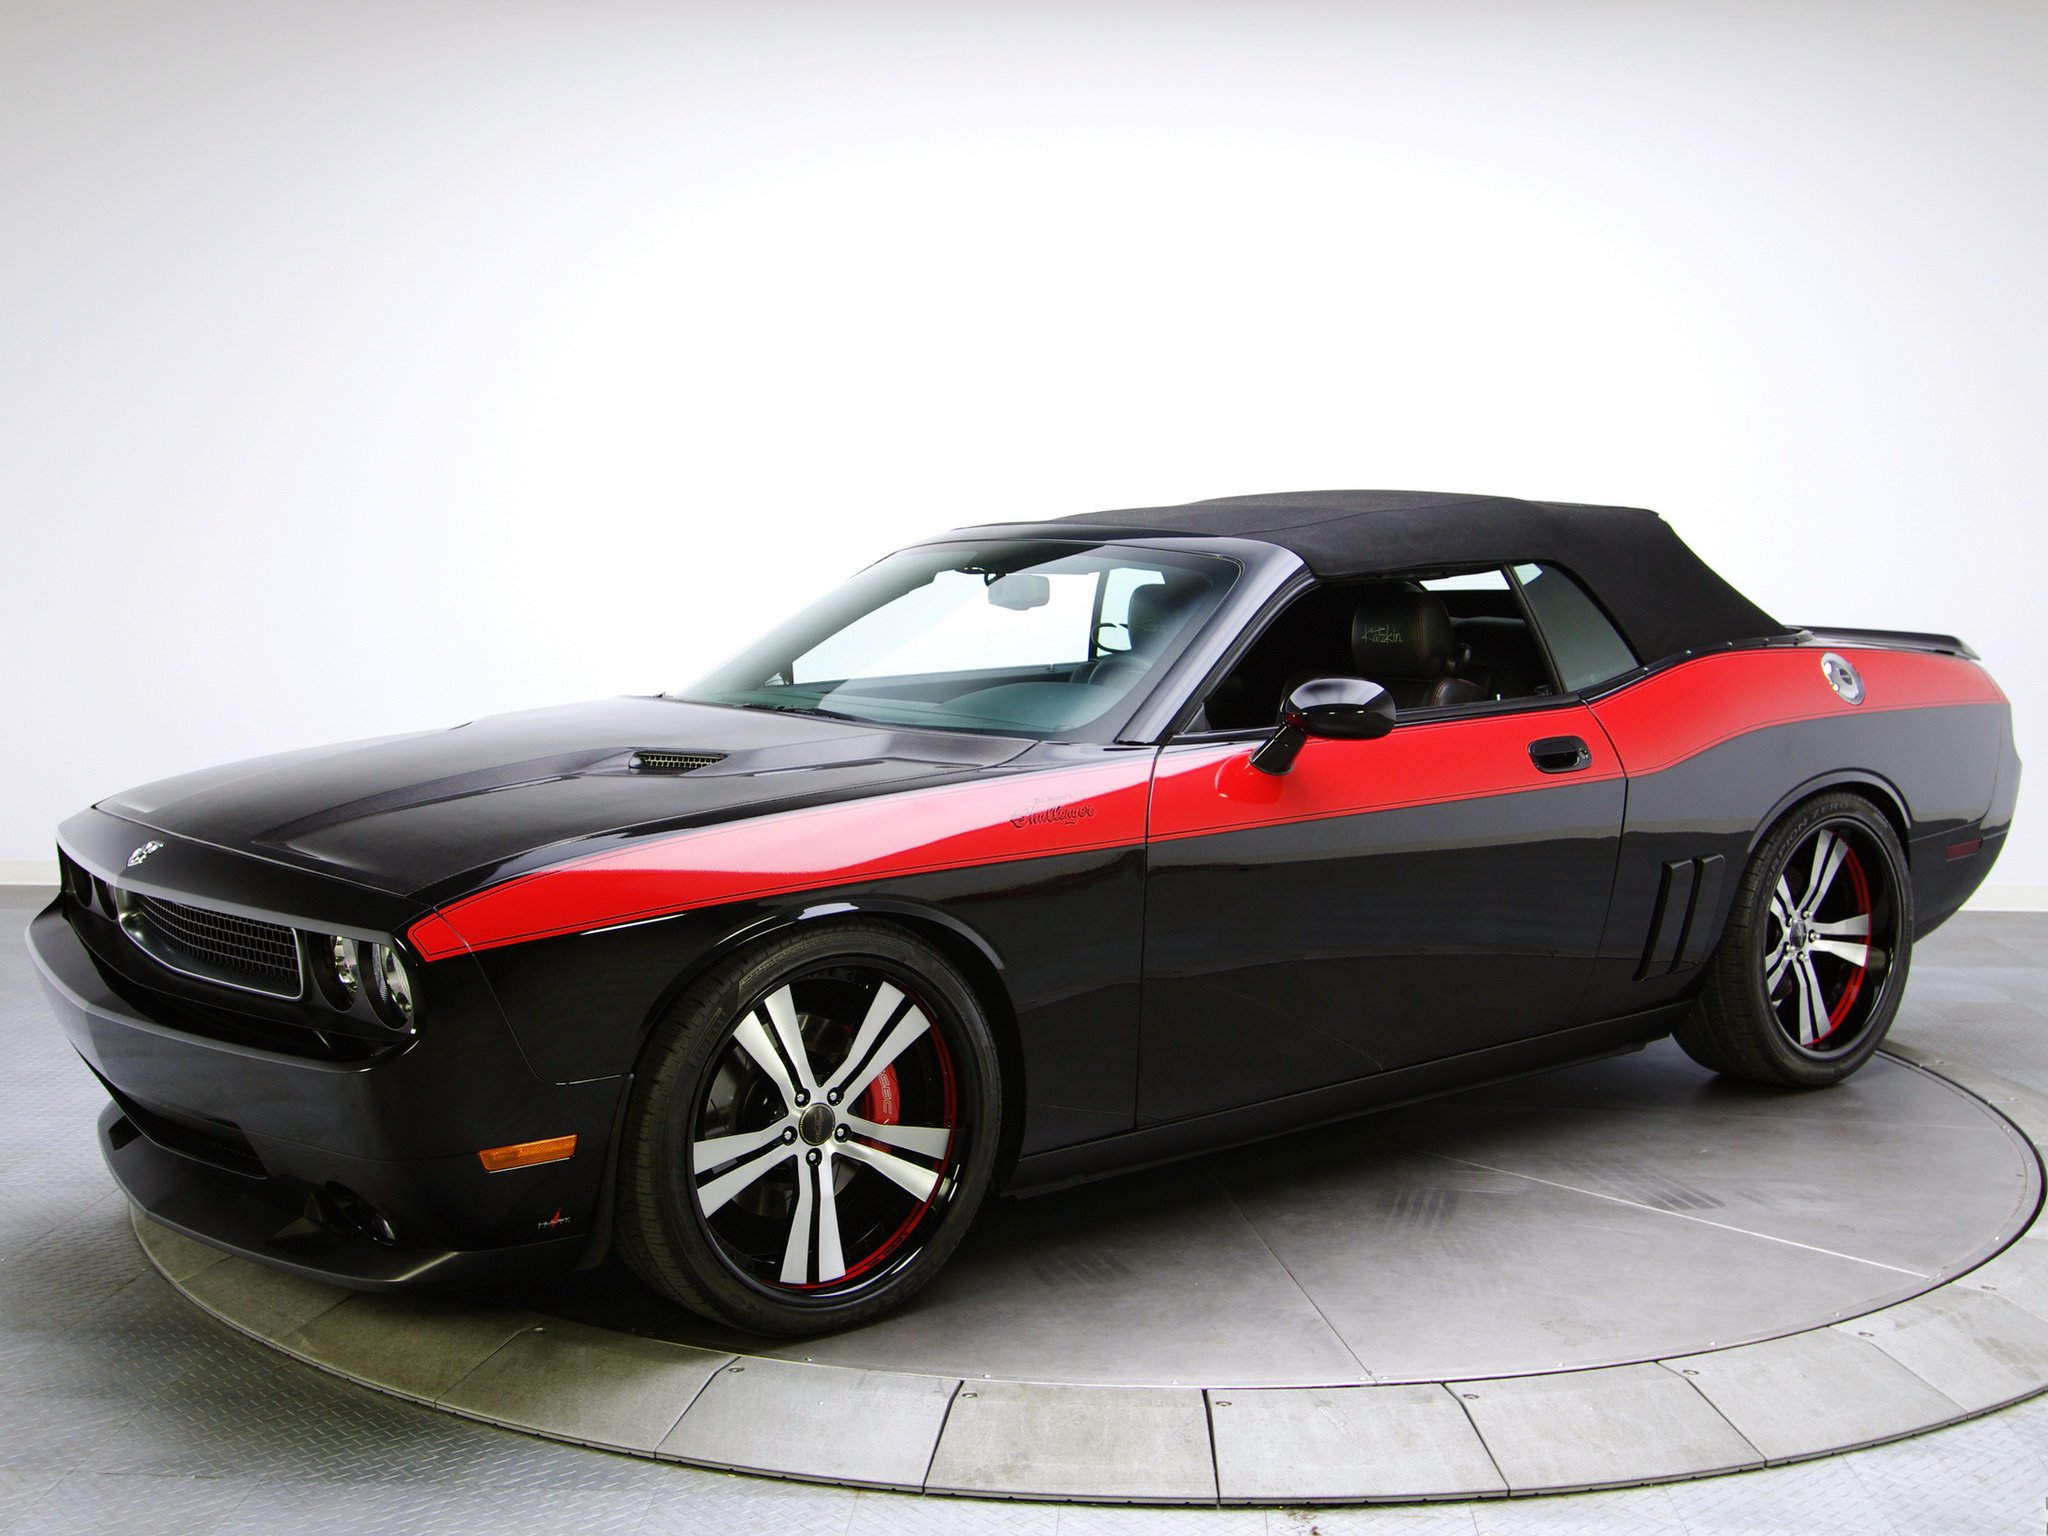 2008, Mr, Norms, Dodge, Challenger, Convertible,  l c , Tuning, Muscle Wallpaper